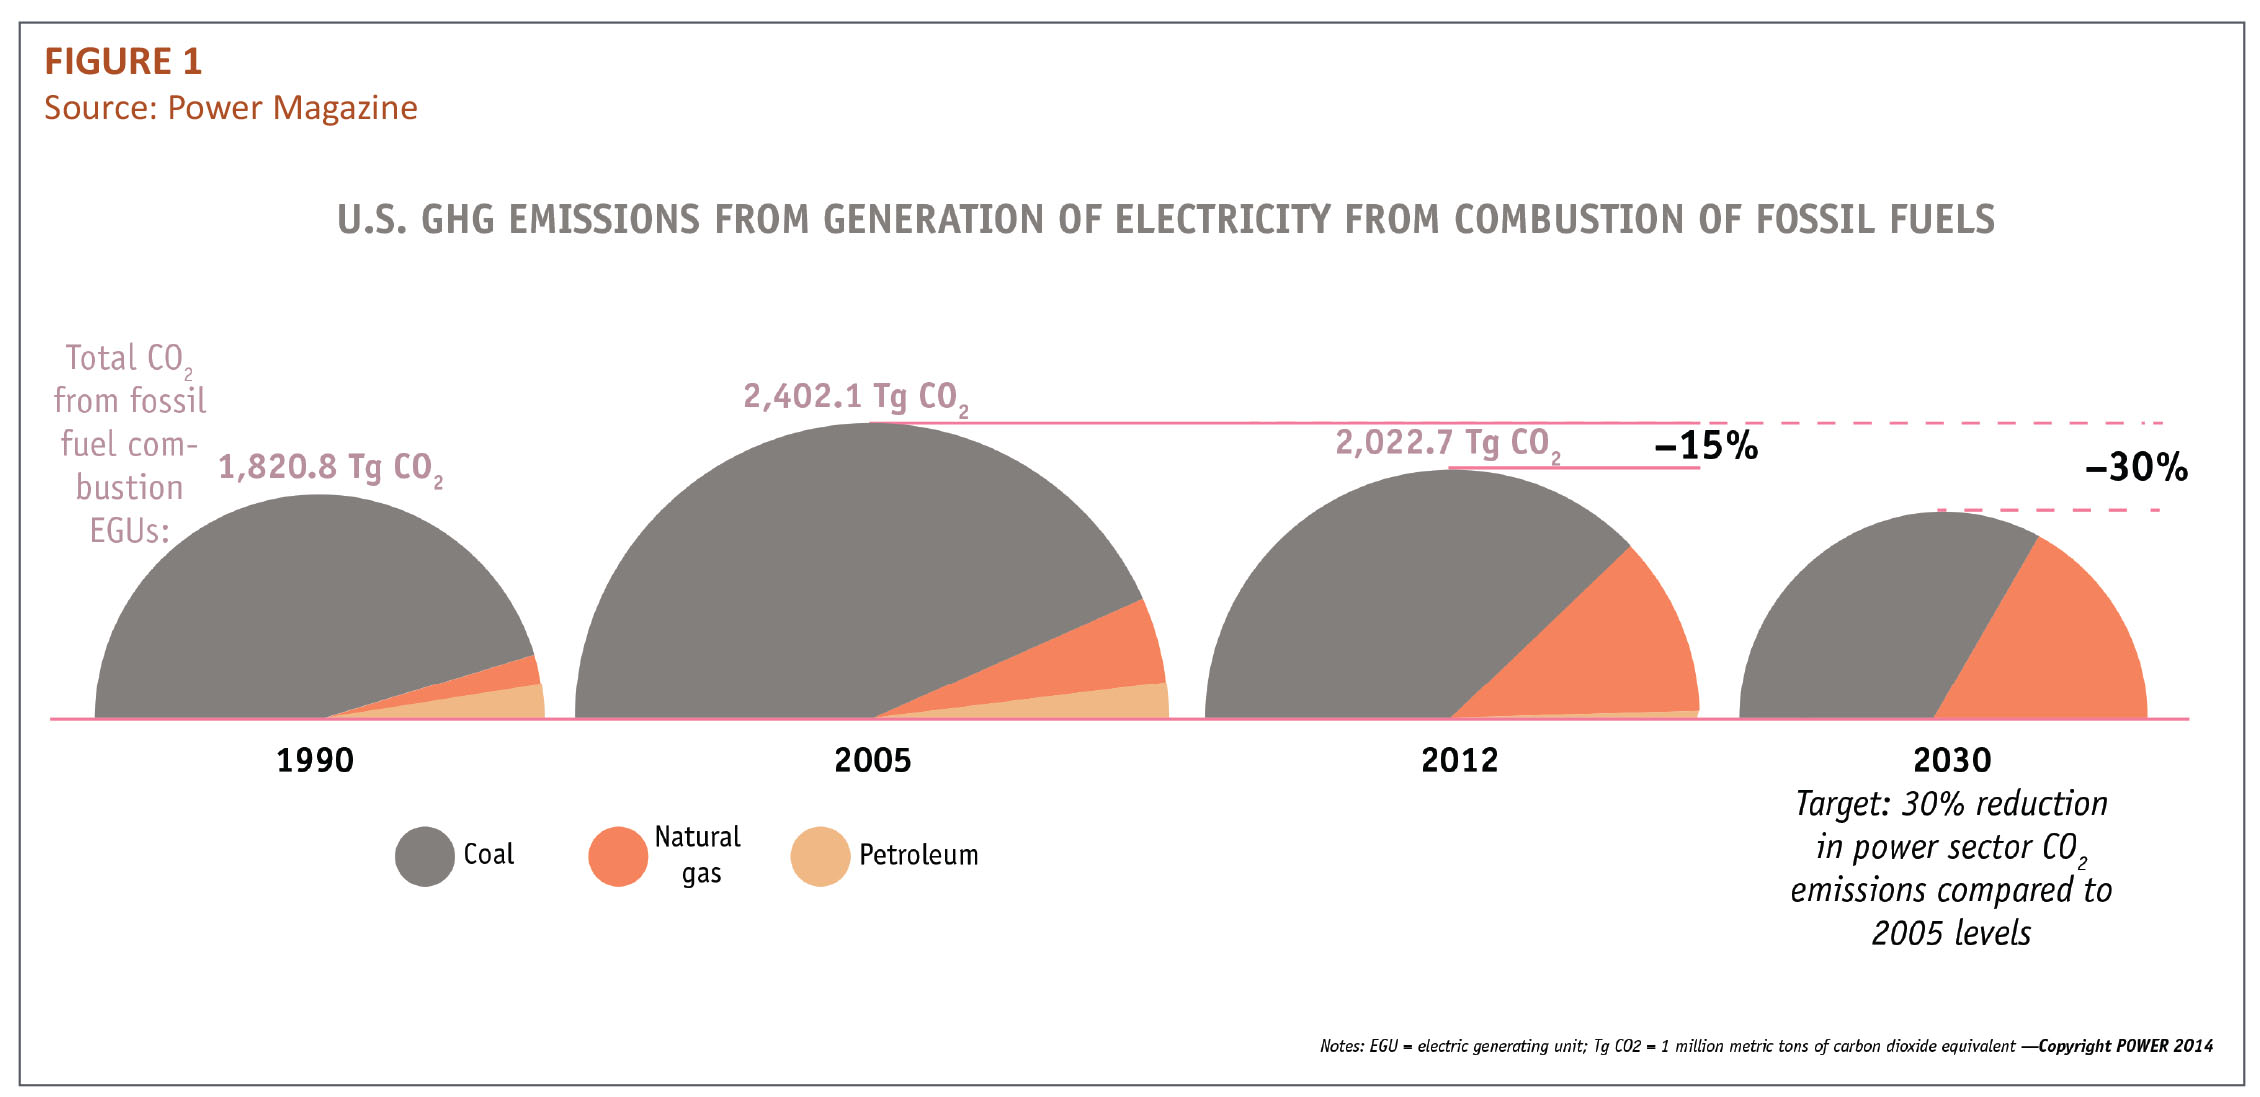 US GHG Emissions from Generation of Electricity from 
Combustion of Fossil Fuels